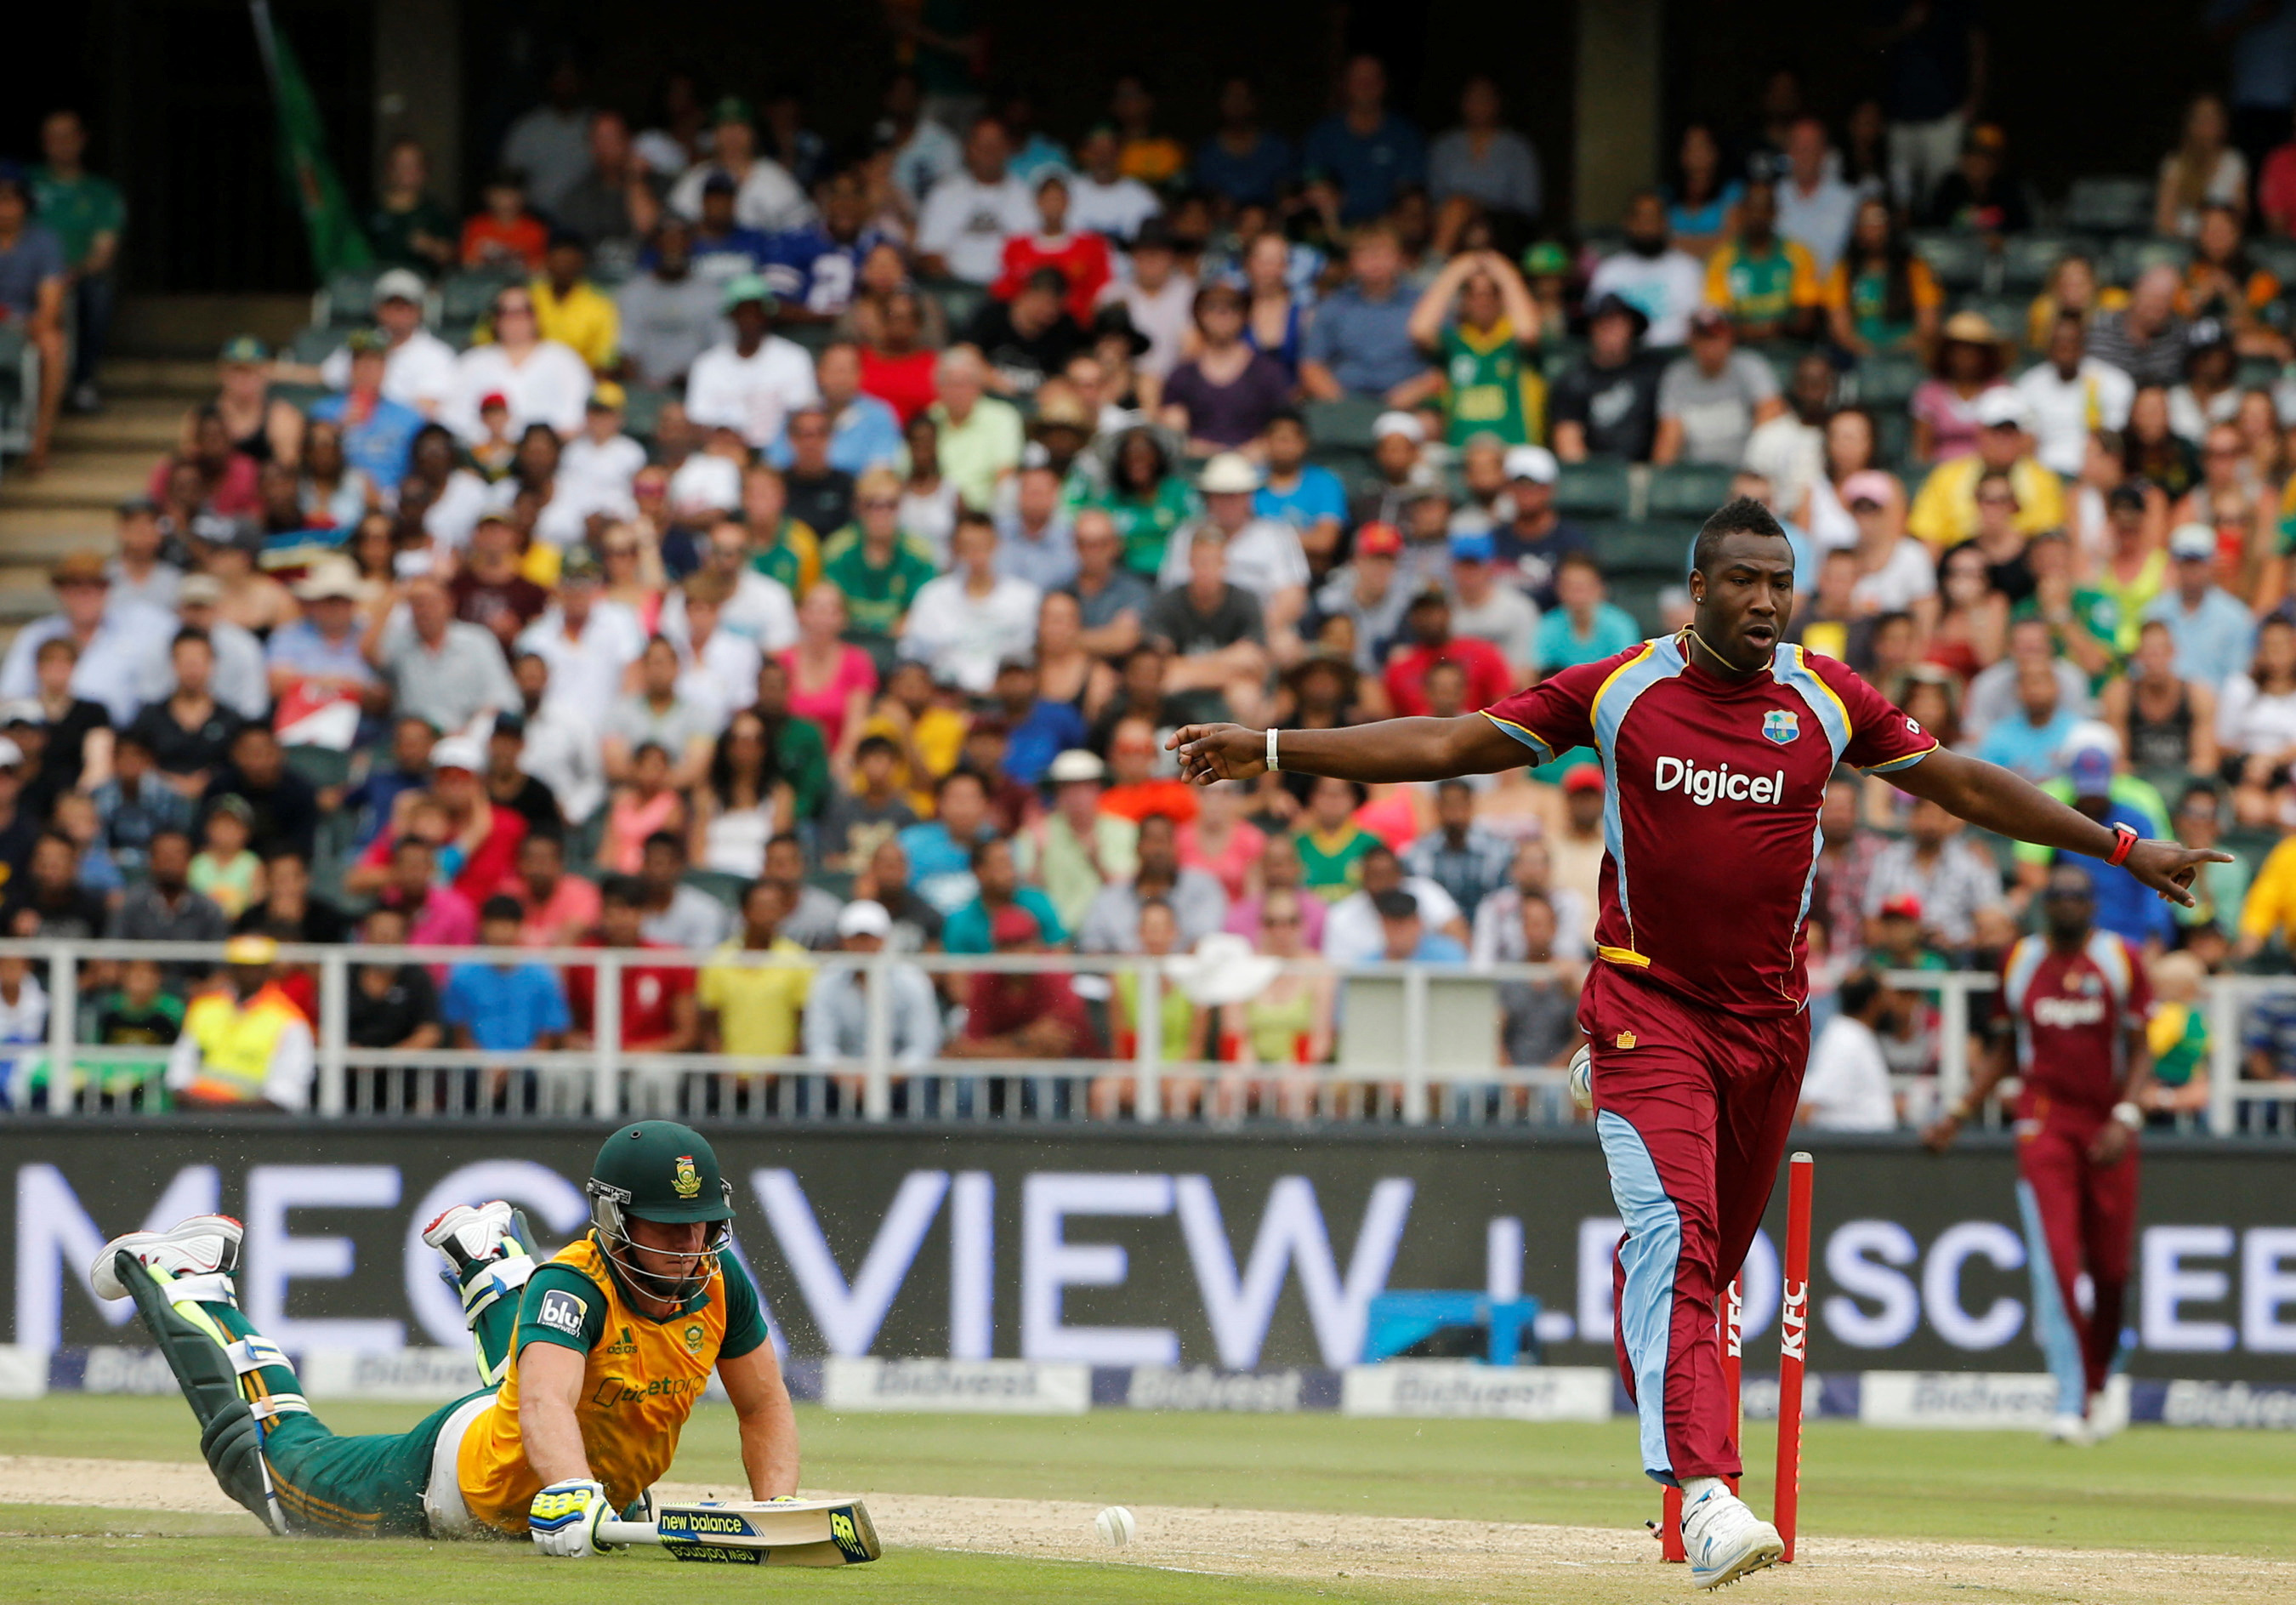 Andre Russell of the West Indies celebrates after the dismissal of South Africa's David Miller during their second T20 series at Wanderers Stadium in Johannesburg